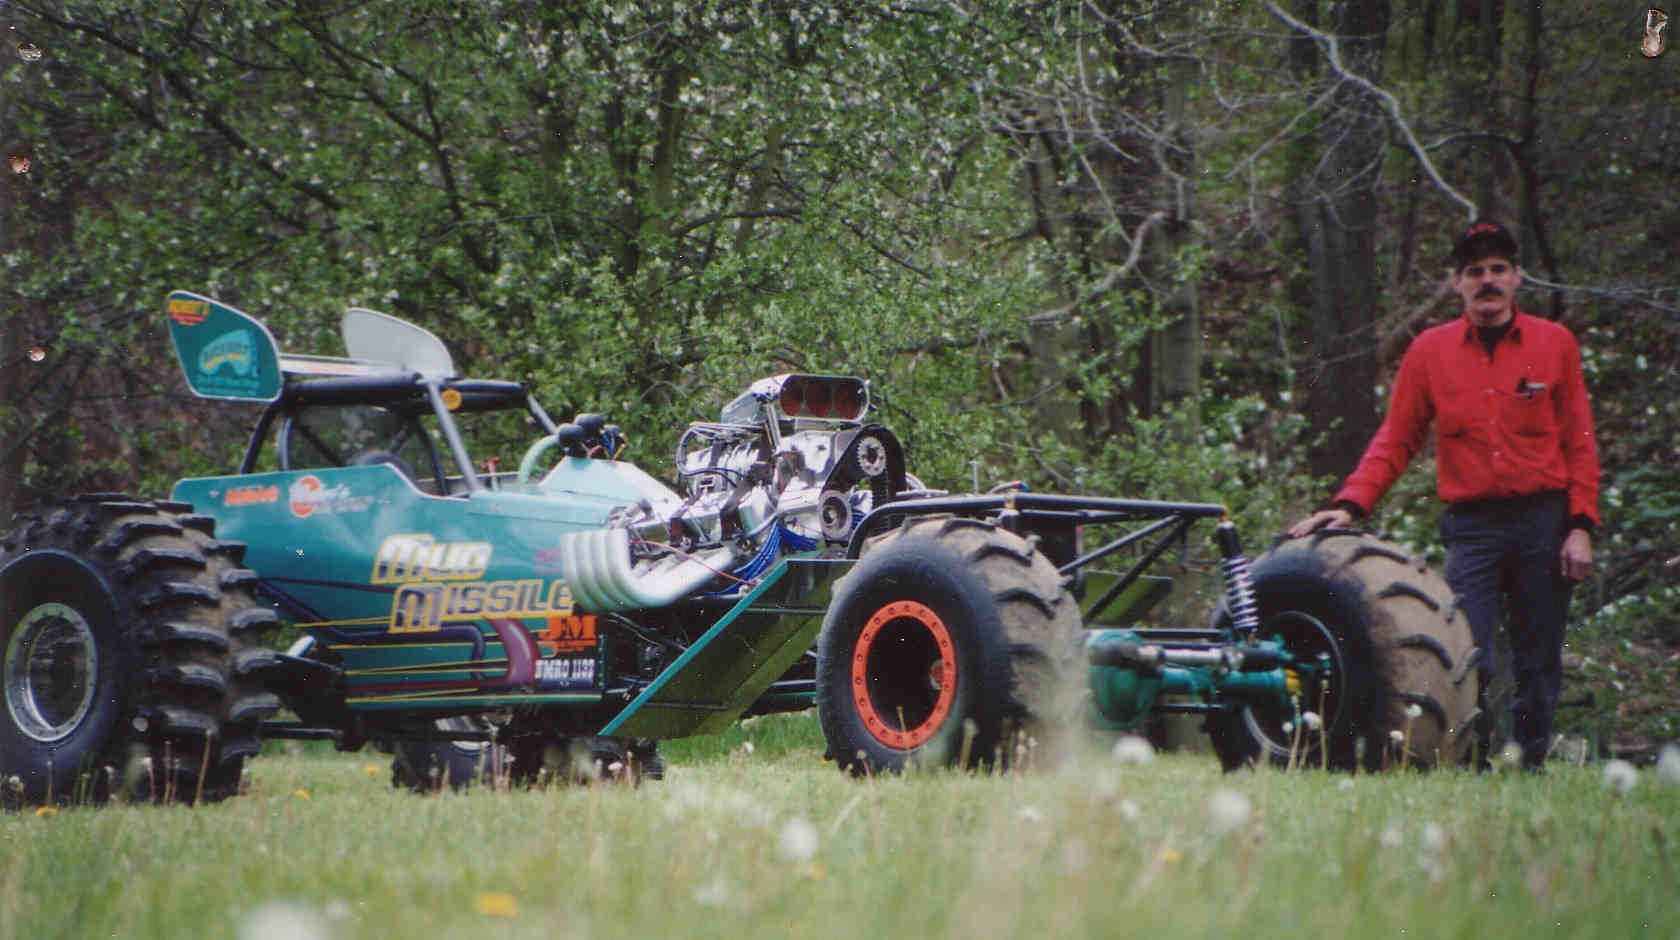 Chuck and Mud Missile, 1998